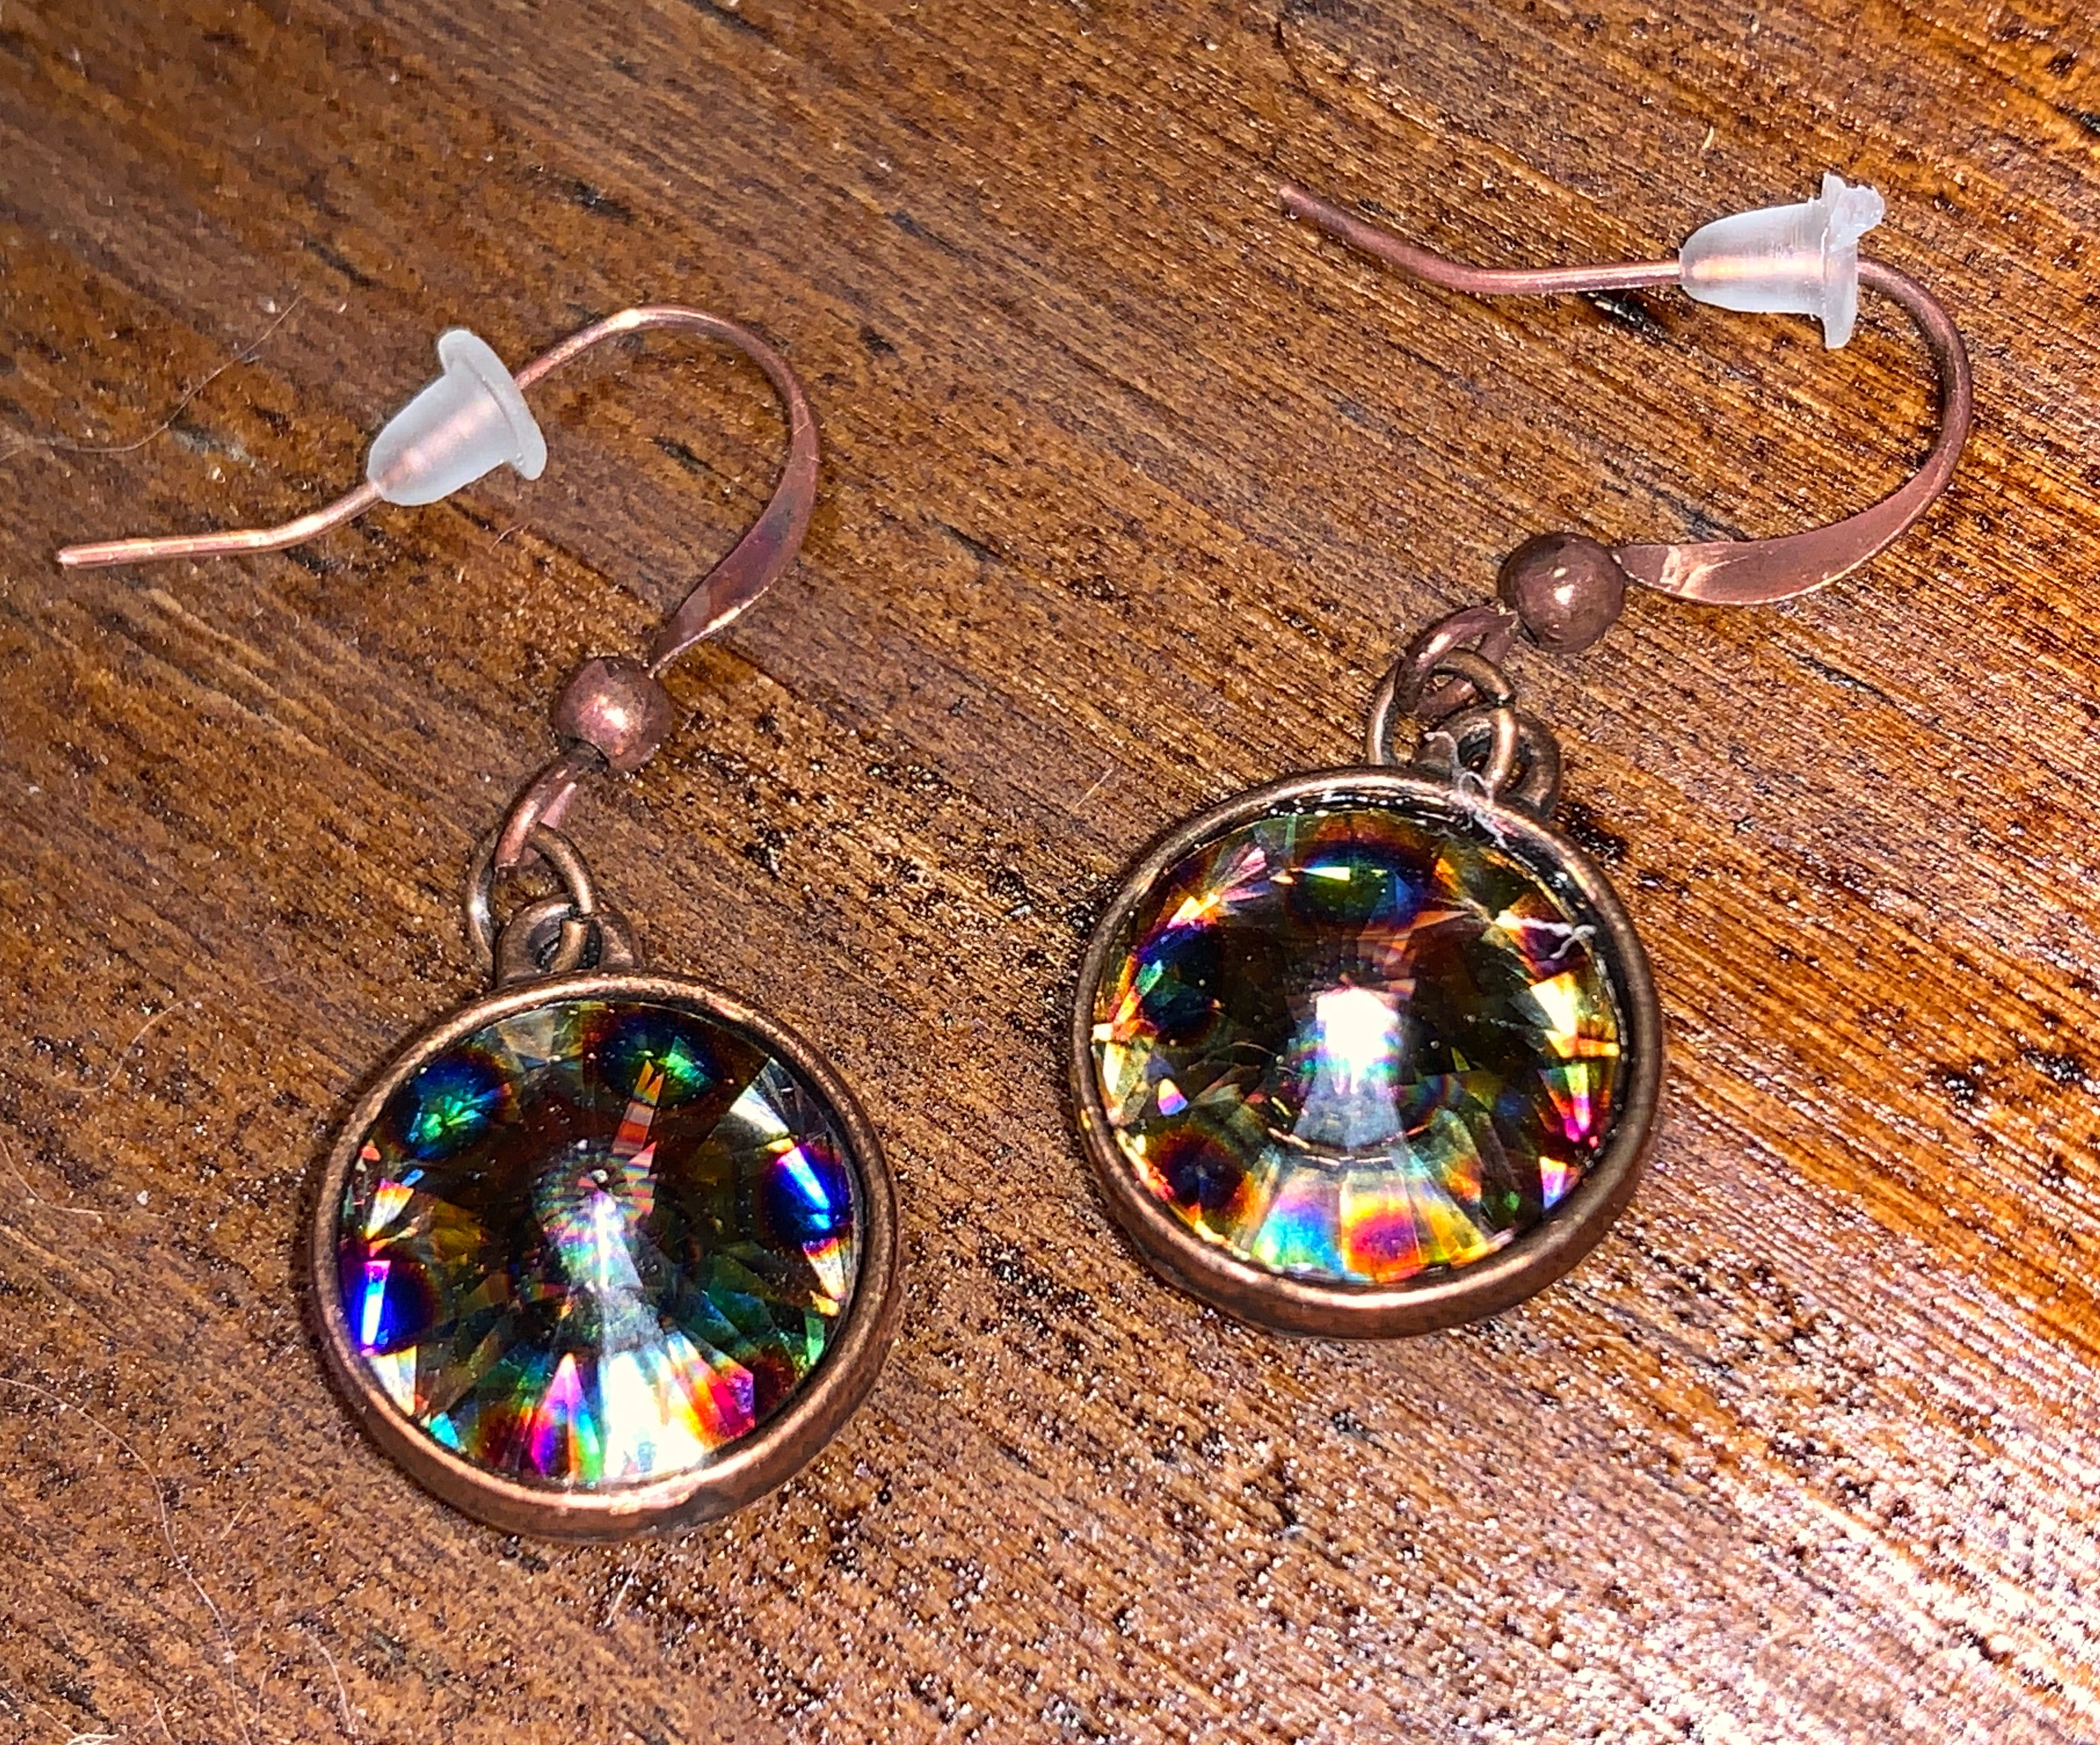 Handmade Copper Earrings with Round Swarovski Peacock Eye Crystals,Earrings - Dirt Road Divas Boutique